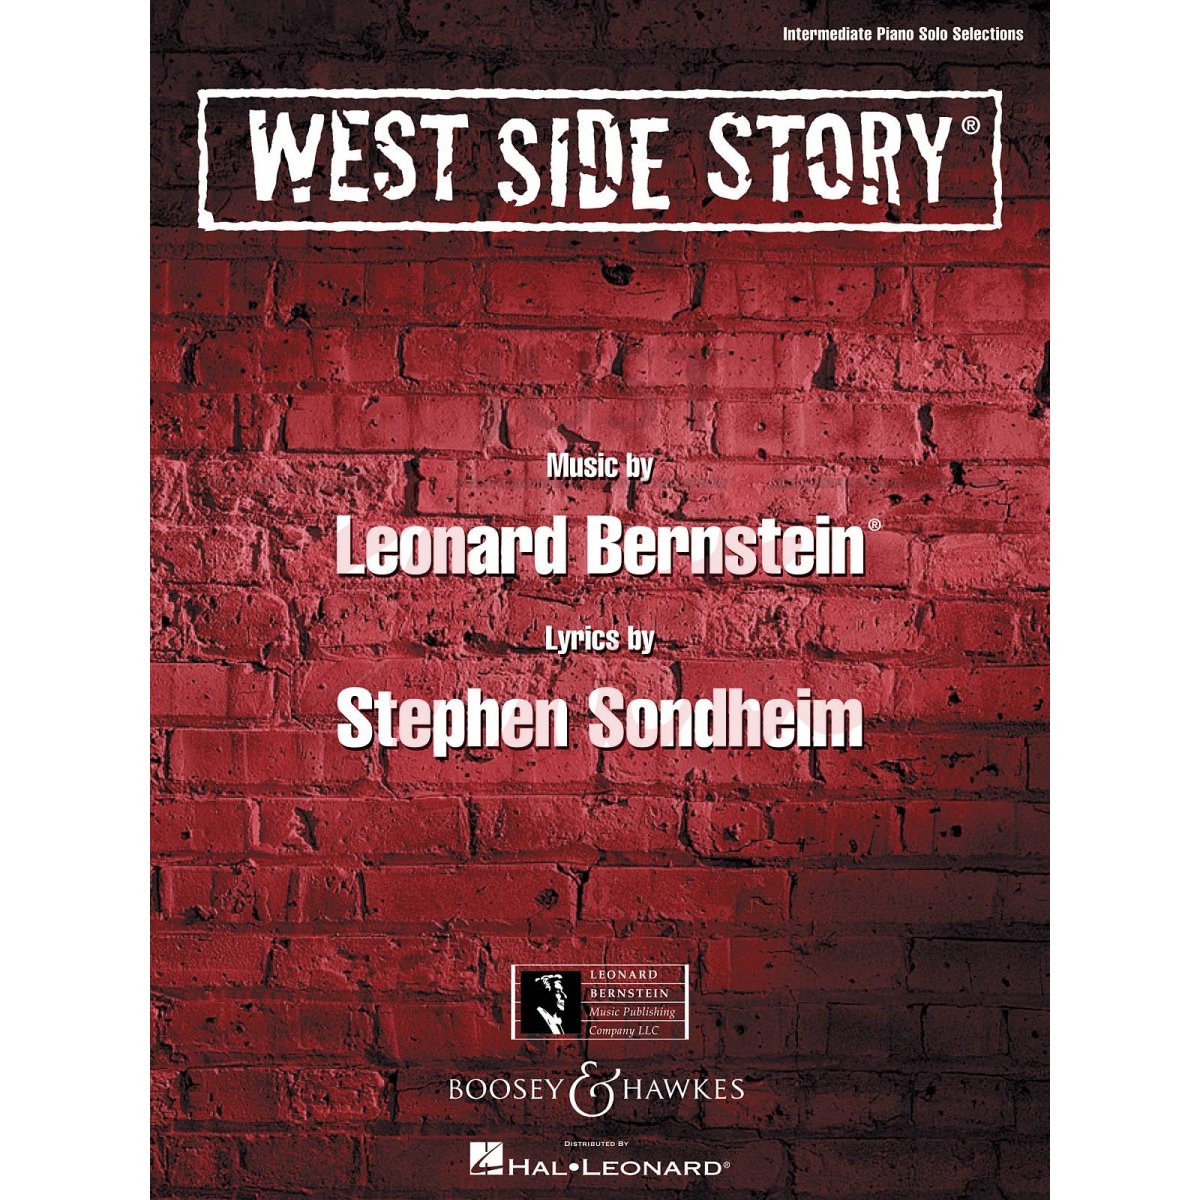 West Side Story [Intermediate Piano Selections]